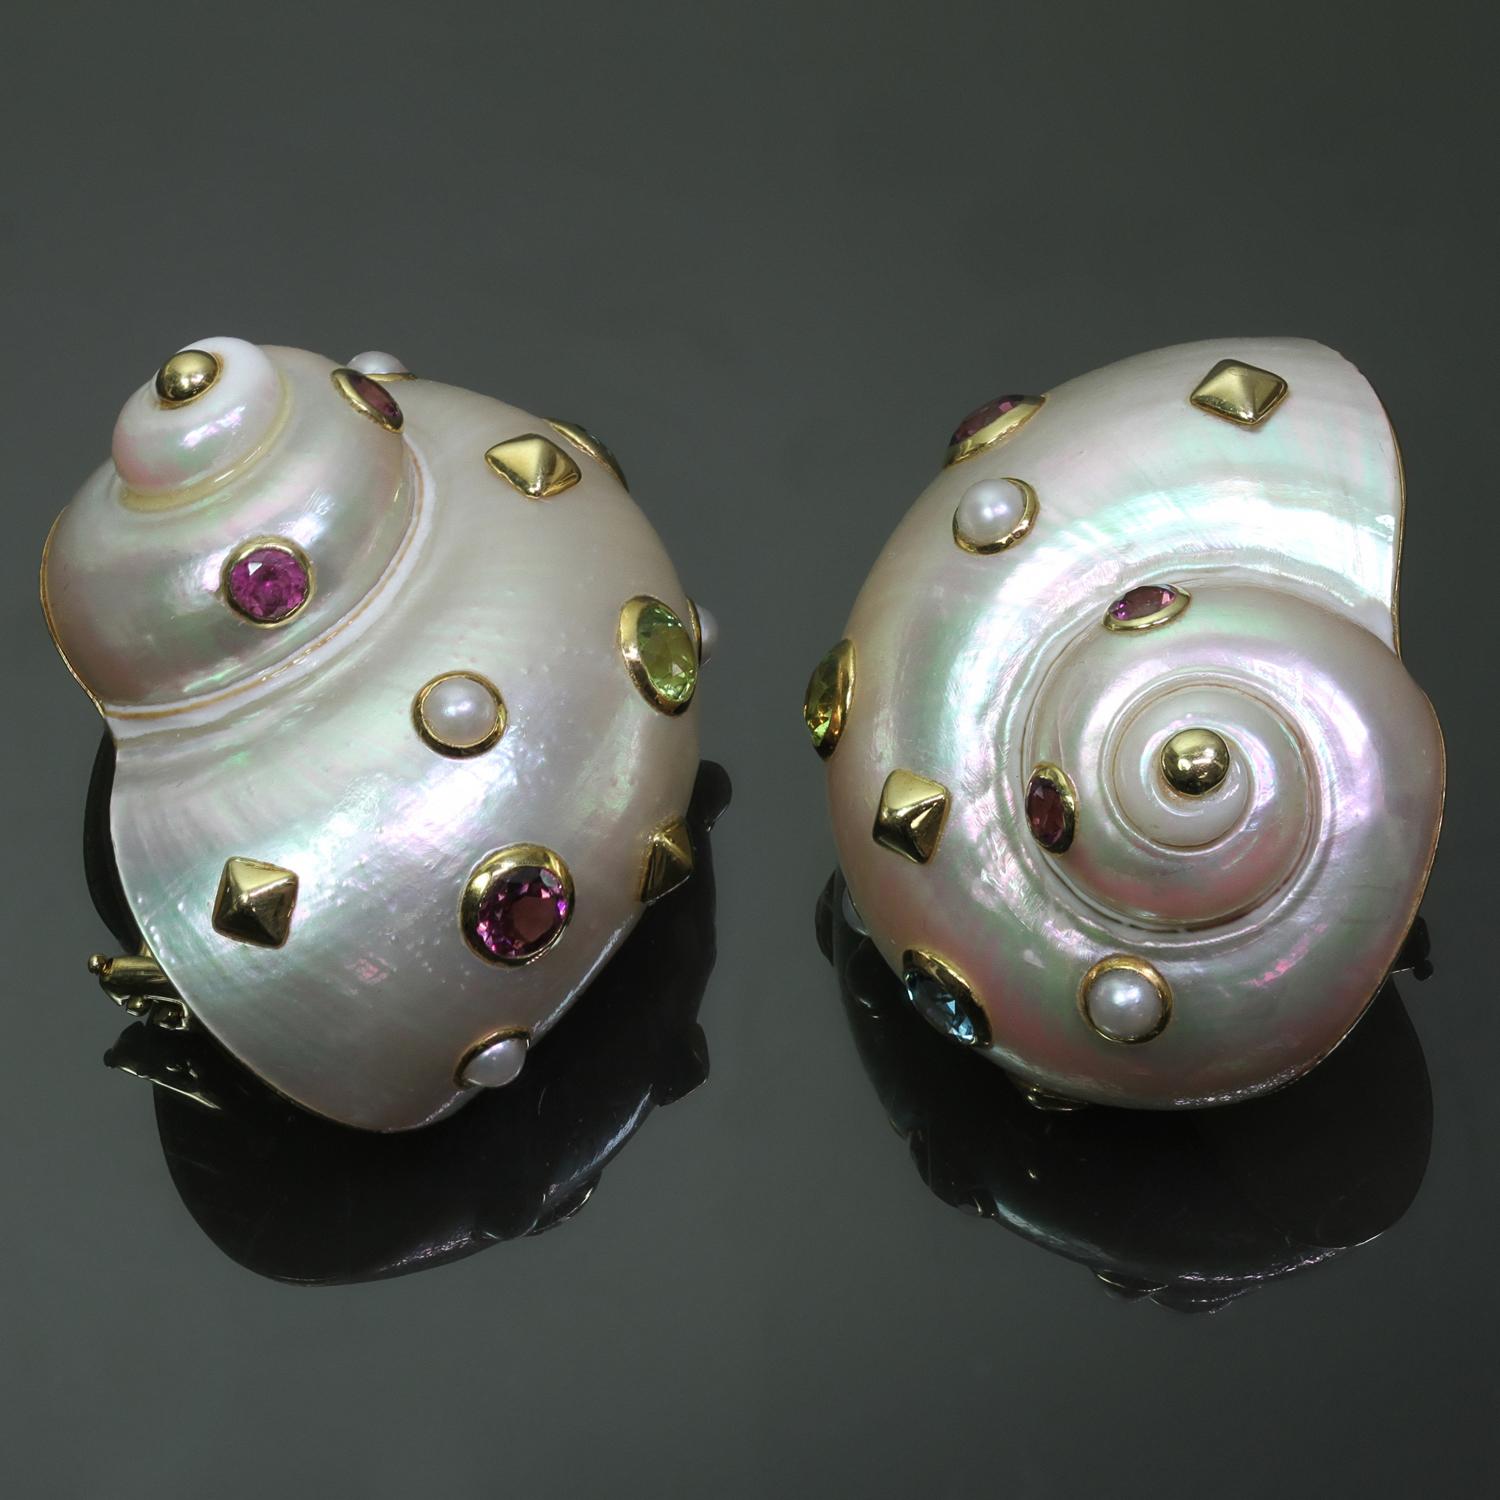 These fabulous nautical clip-on earrings are crafted out of 18k yellow gold and mother-of-pearl shells adorned with a vibrant array of gemstones such as amethyst, peridot, and blue topaz. Measurements: 1.02